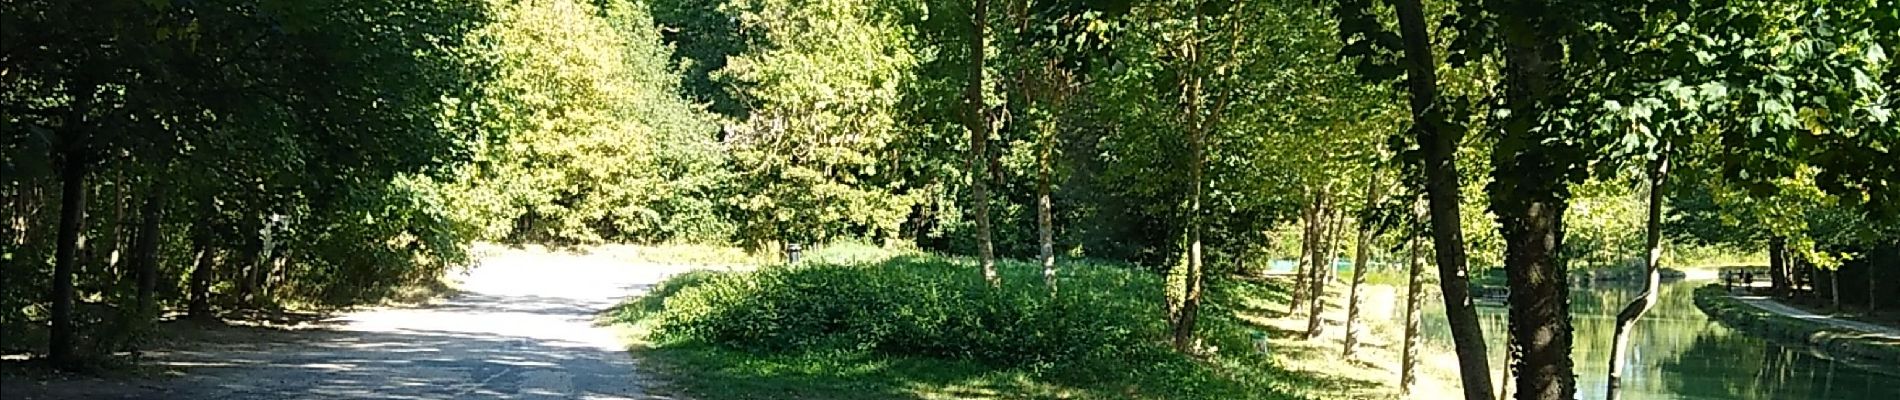 Trail Walking Claye-Souilly - Claude sept 2019 Catherine - Photo